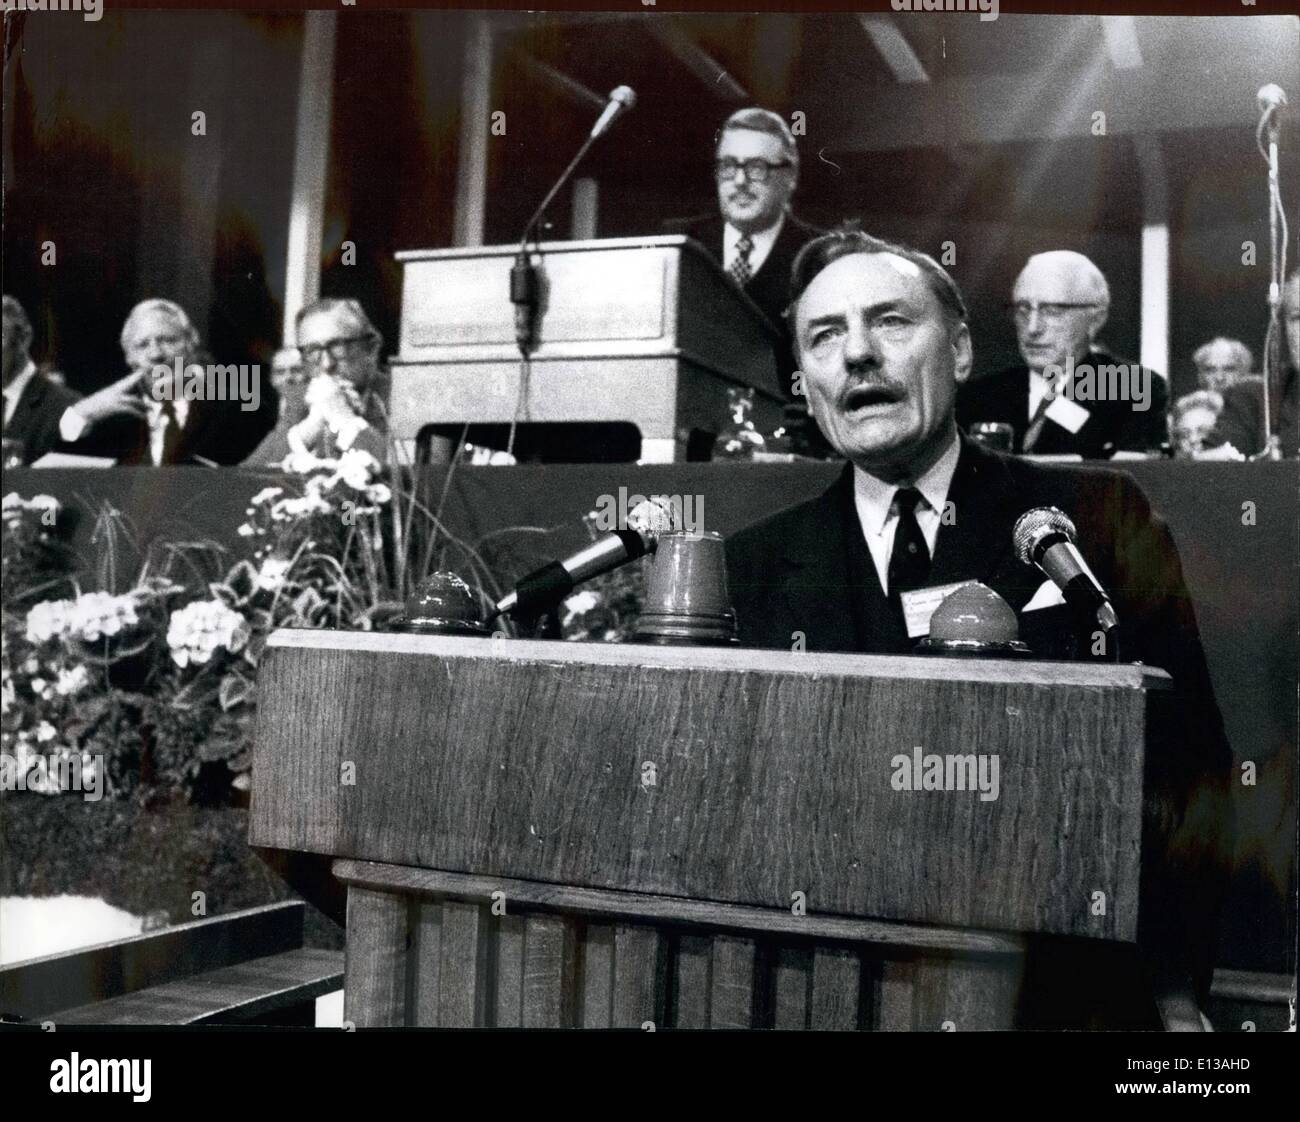 Feb. 29, 2012 - ,October 13th, 1972 The Conservative Party Conference at Blackpool. Enoch Powell looses the ballot on Asians. Photo Shows: Mr. Enoch Powell speaking at the conference on Mr. Heath's policy of admitting Uganda Asians. Mr. Heath can be seen in background left with hand to face. Stock Photo